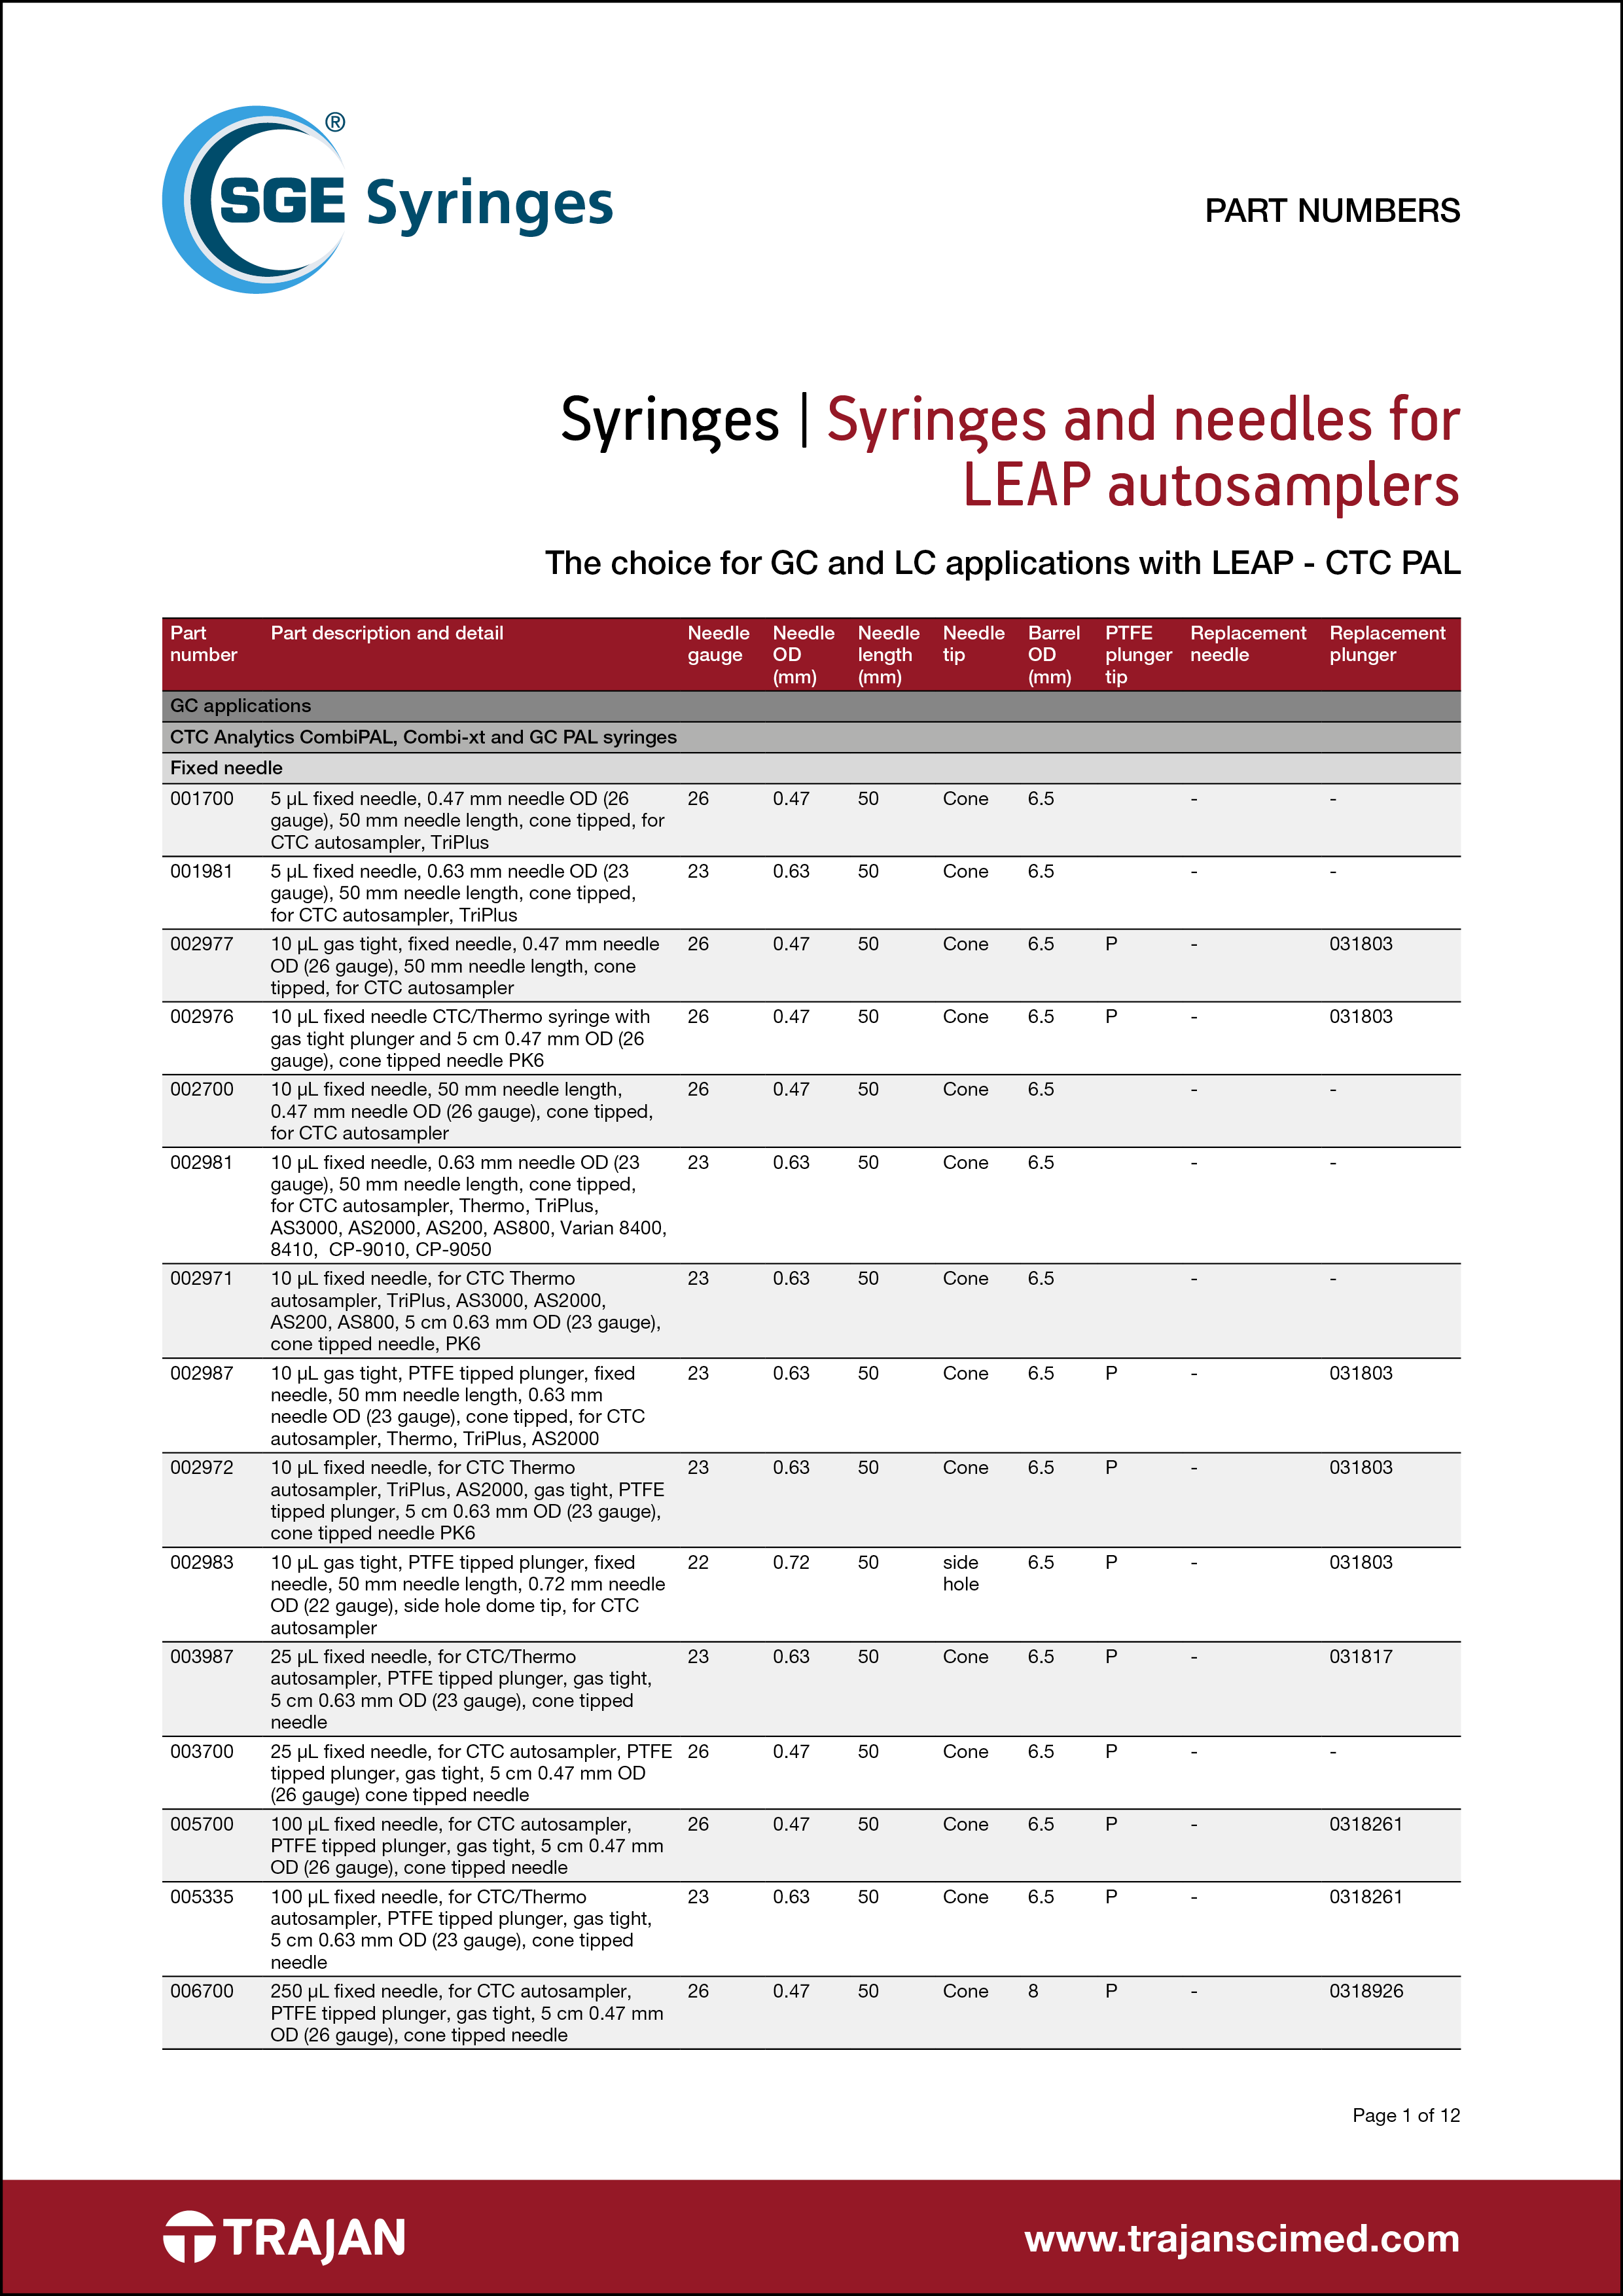 Part Number List - Syringes and needles for LEAP autosamplers